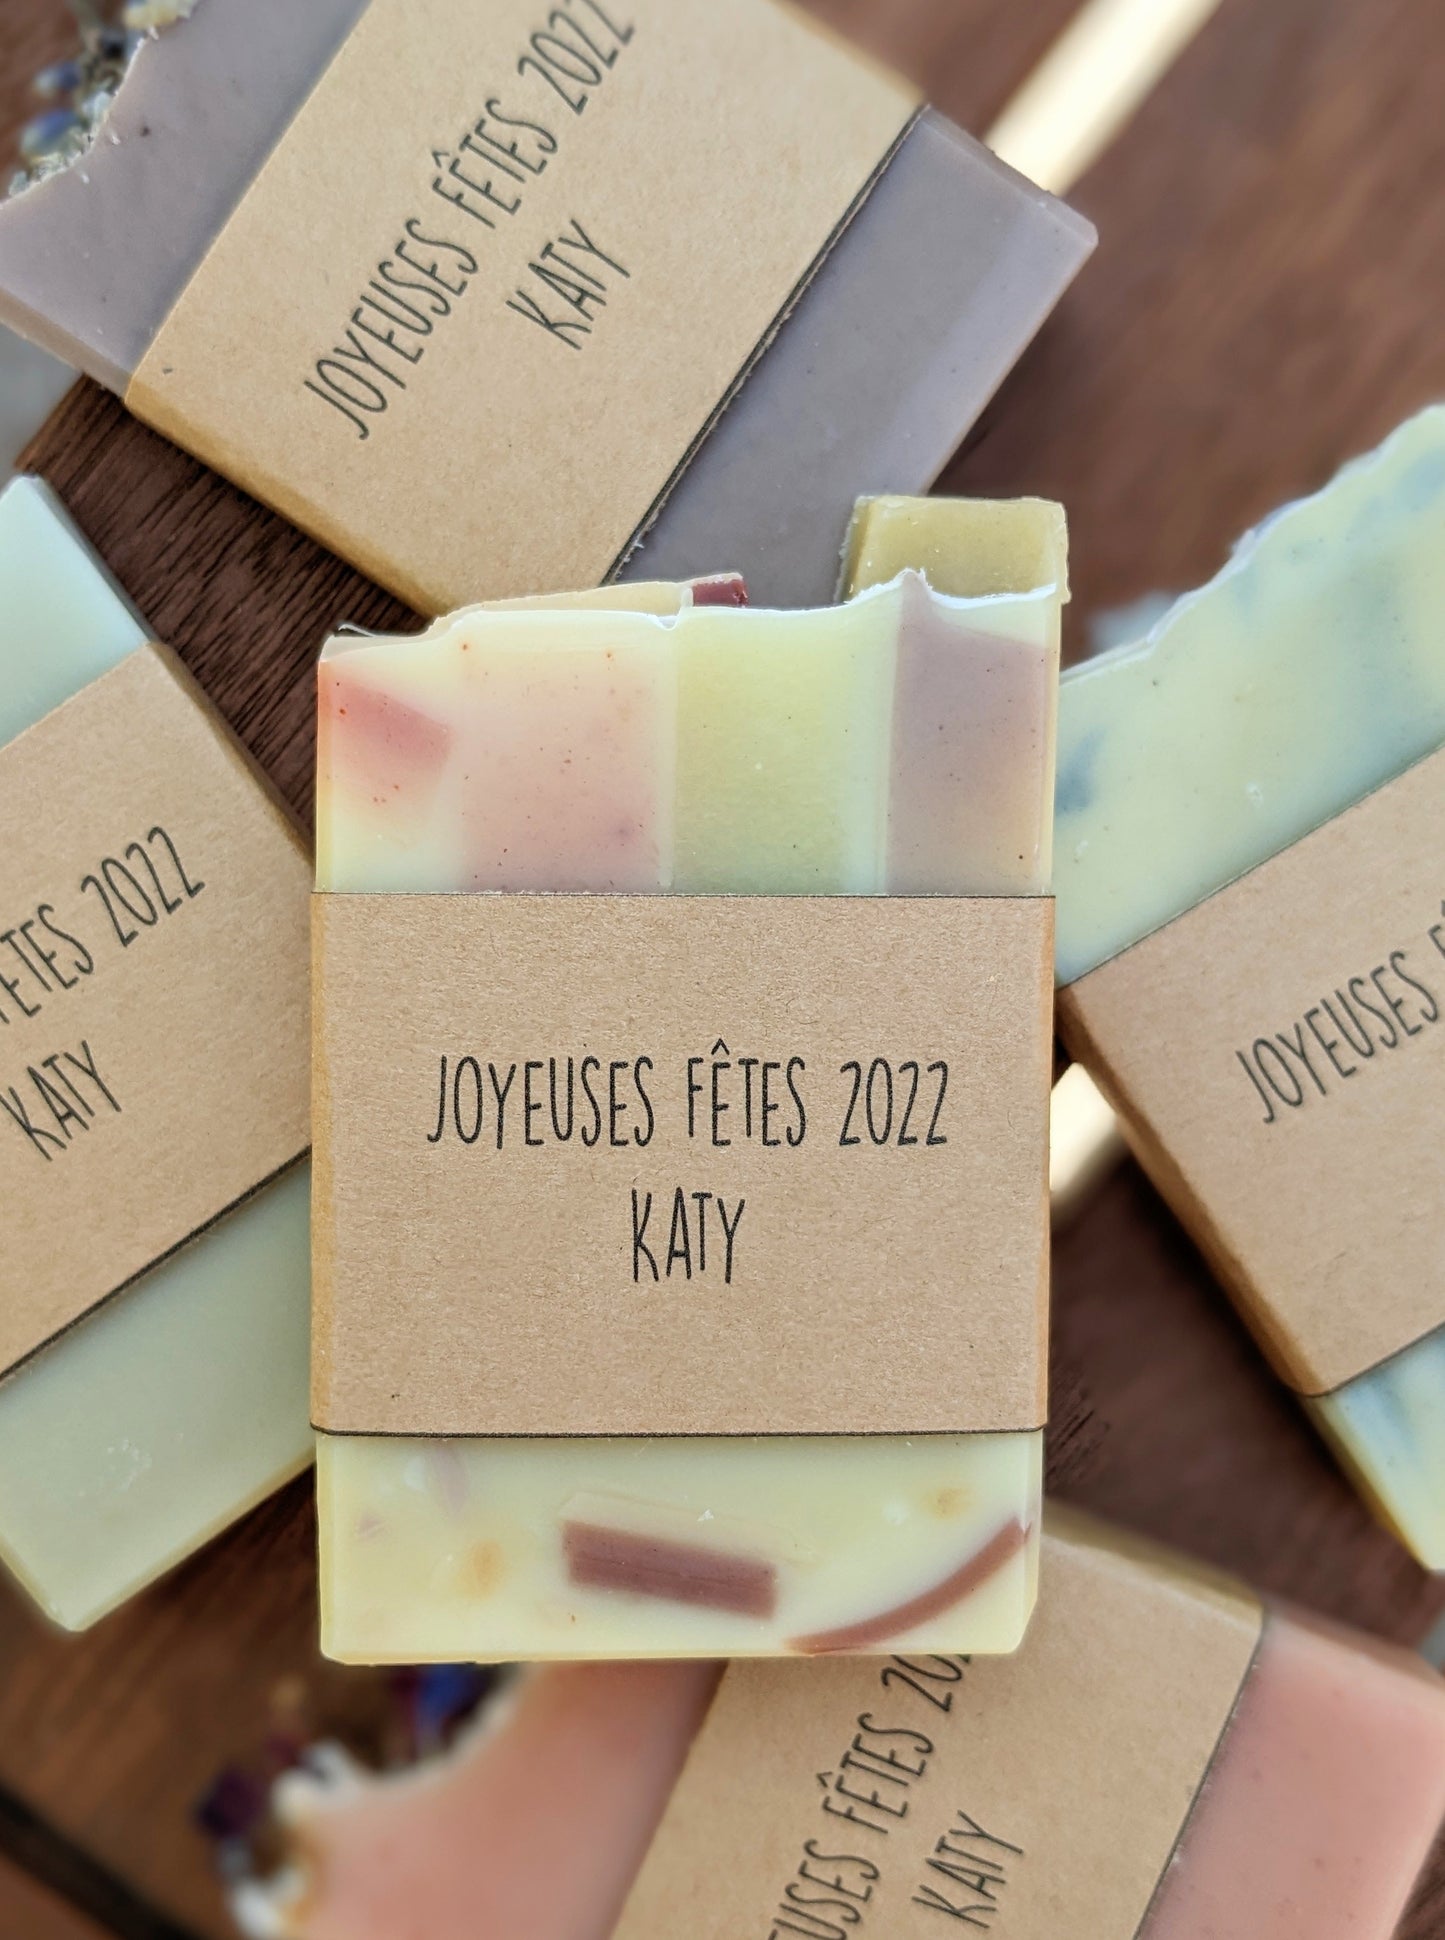 Soap Favors | Set of 20 Mini (1 oz) Soaps for Weddings, Showers, or Airbnb Guests